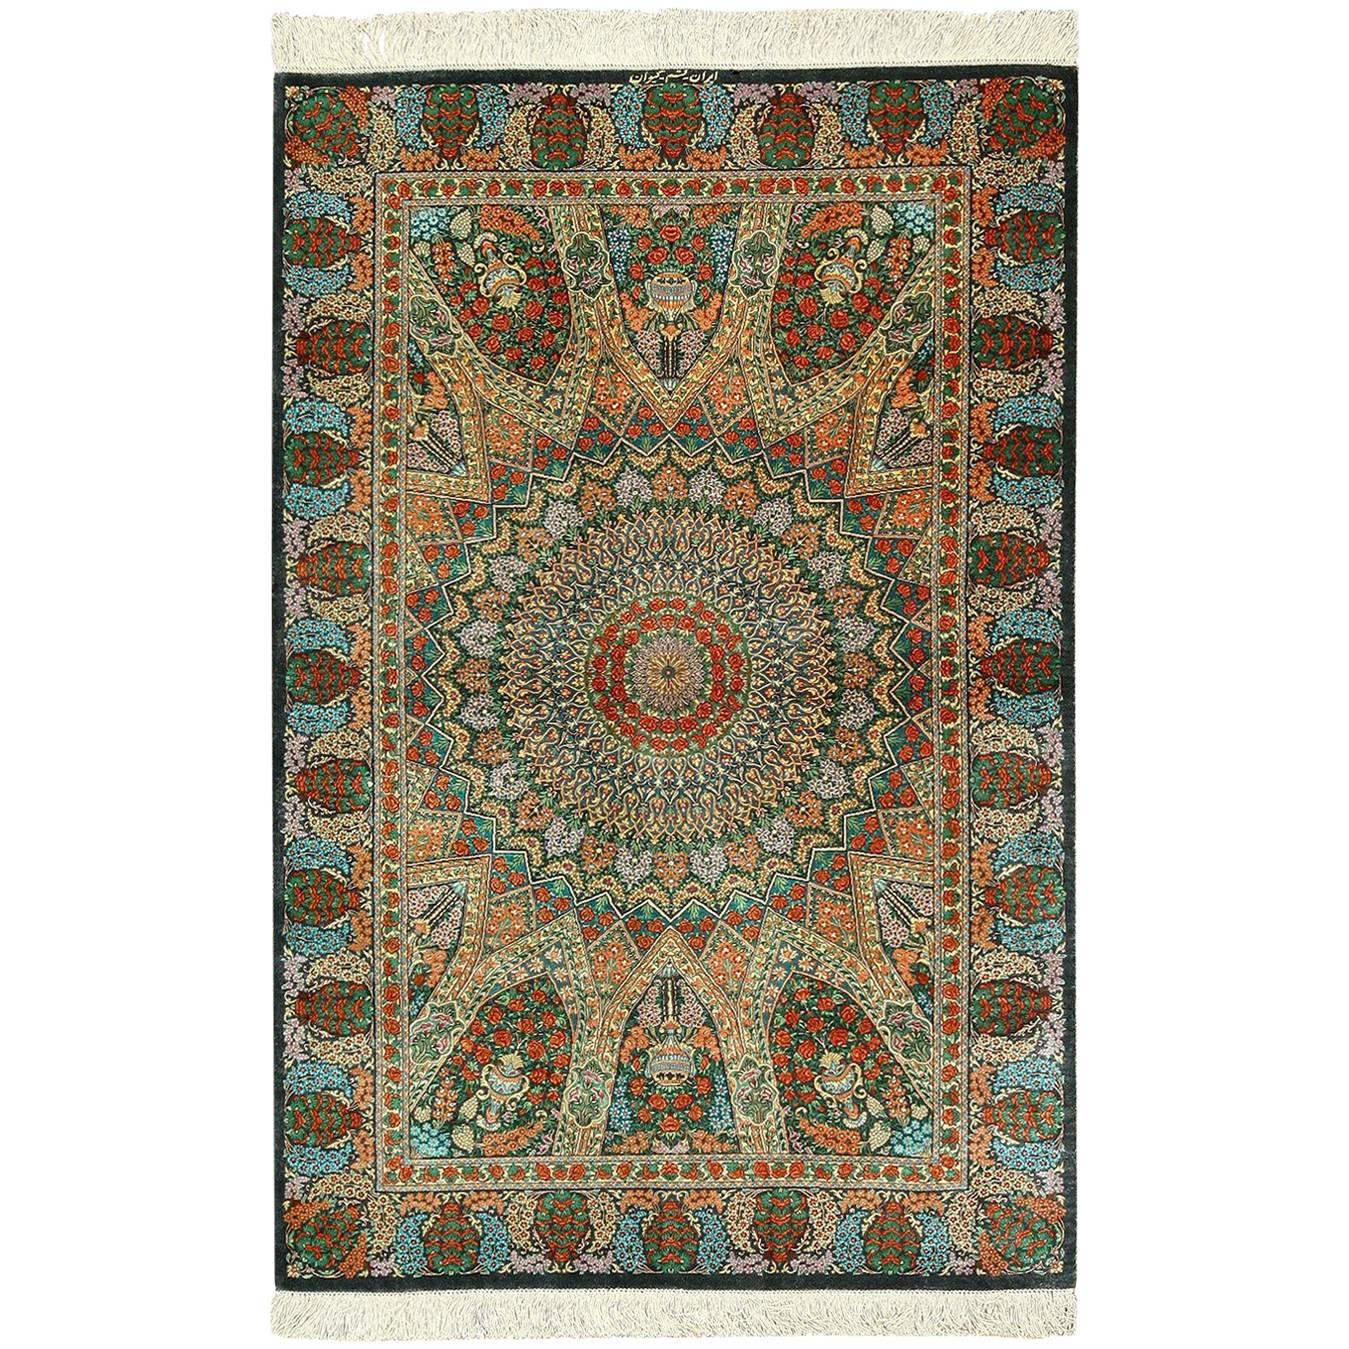 Green Background Silk Persian Qum Rug. Size: 3 ft 4 in x 5 ft (1.02 m x 1.52 m)